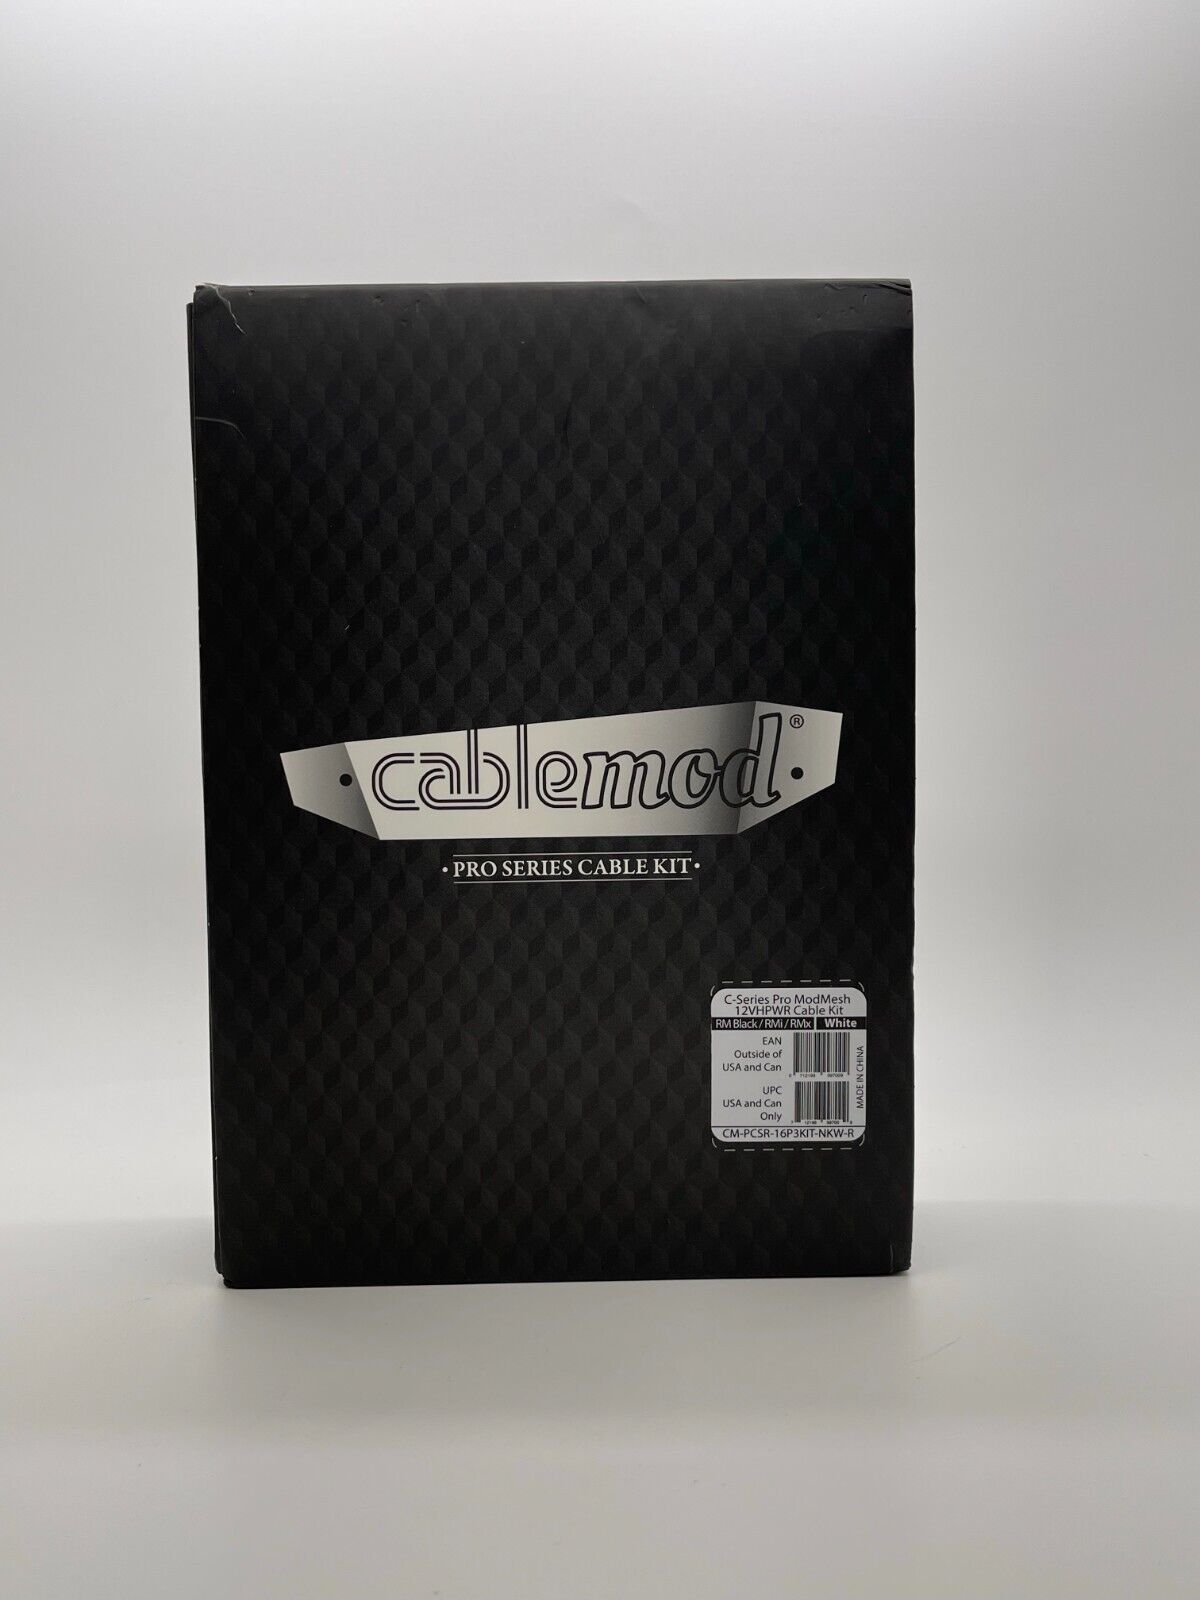 CableMod C-Series Pro ModMesh Sleeved 12VHPWR Cable Kit For Corsair Type 4 RM A2